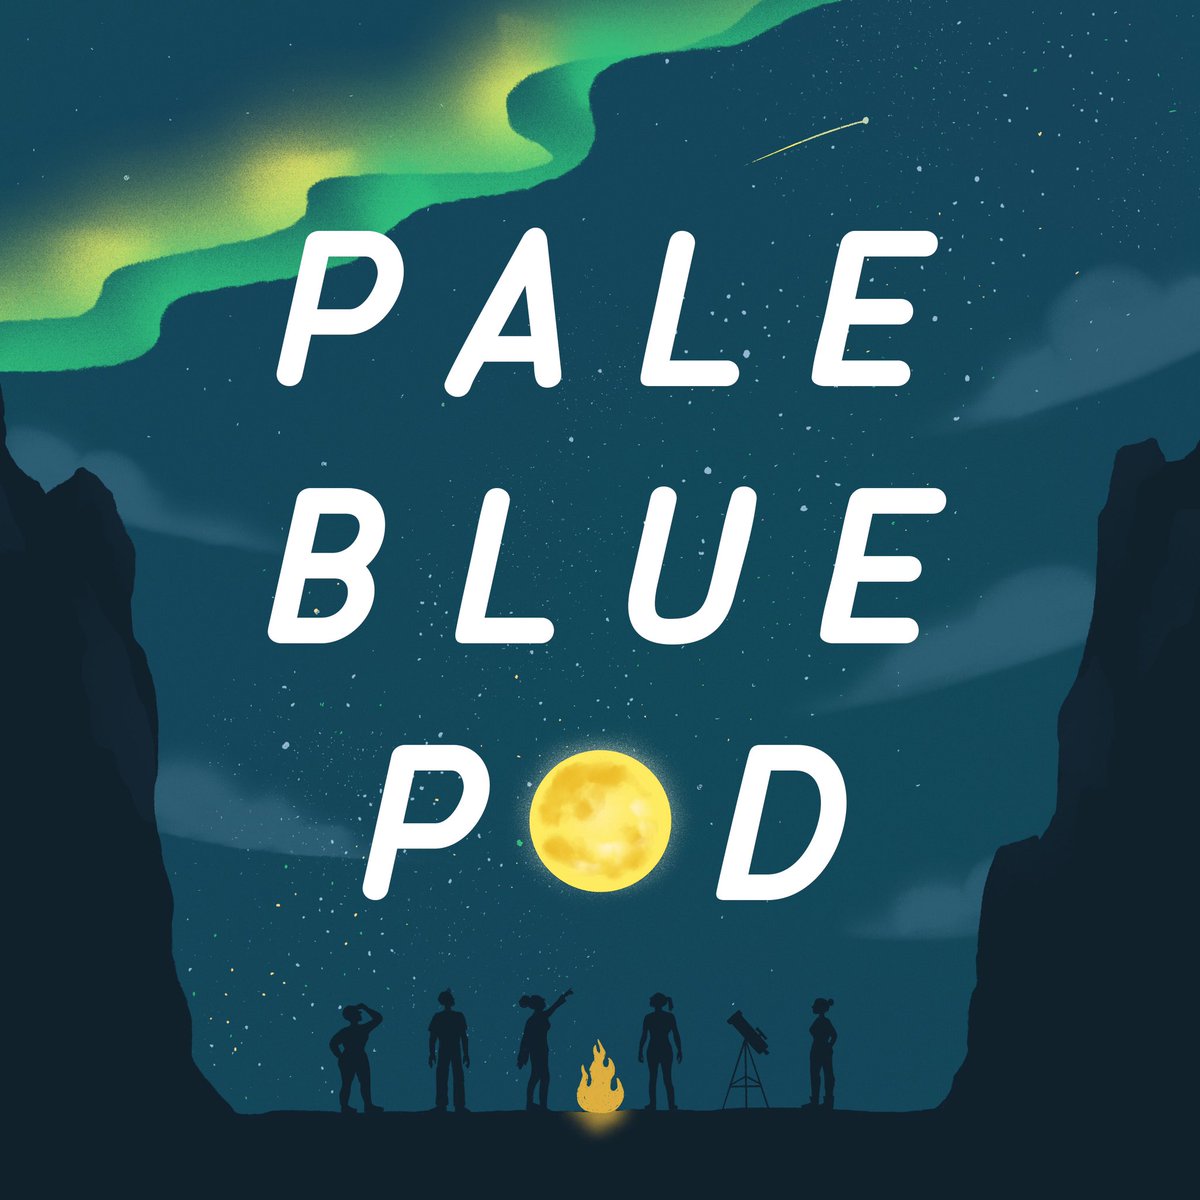 My podcast @PaleBluePod is almost a year old! To celebrate, @corintellectual and I are doing an AMA episode where we answer your burning questions about space and our relationships to it Send us your questions! DM me or email palebluepodcast[at]gmail